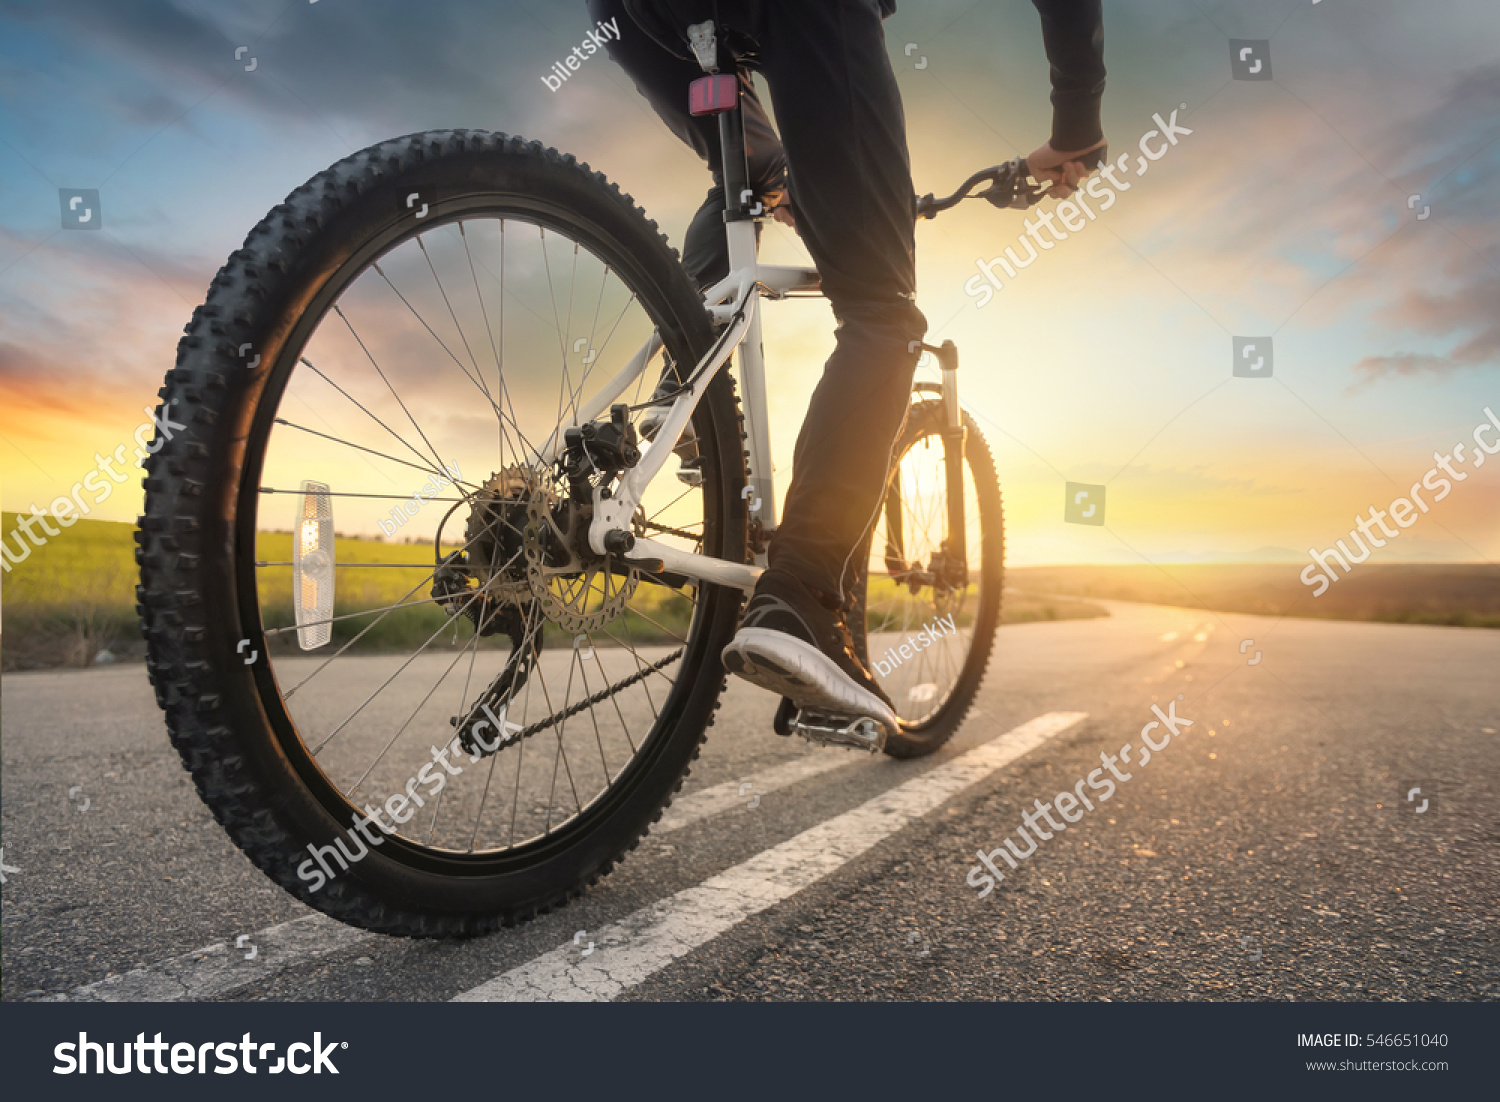 Ride on bike on the road. Sport and active life concept in the summer time #546651040